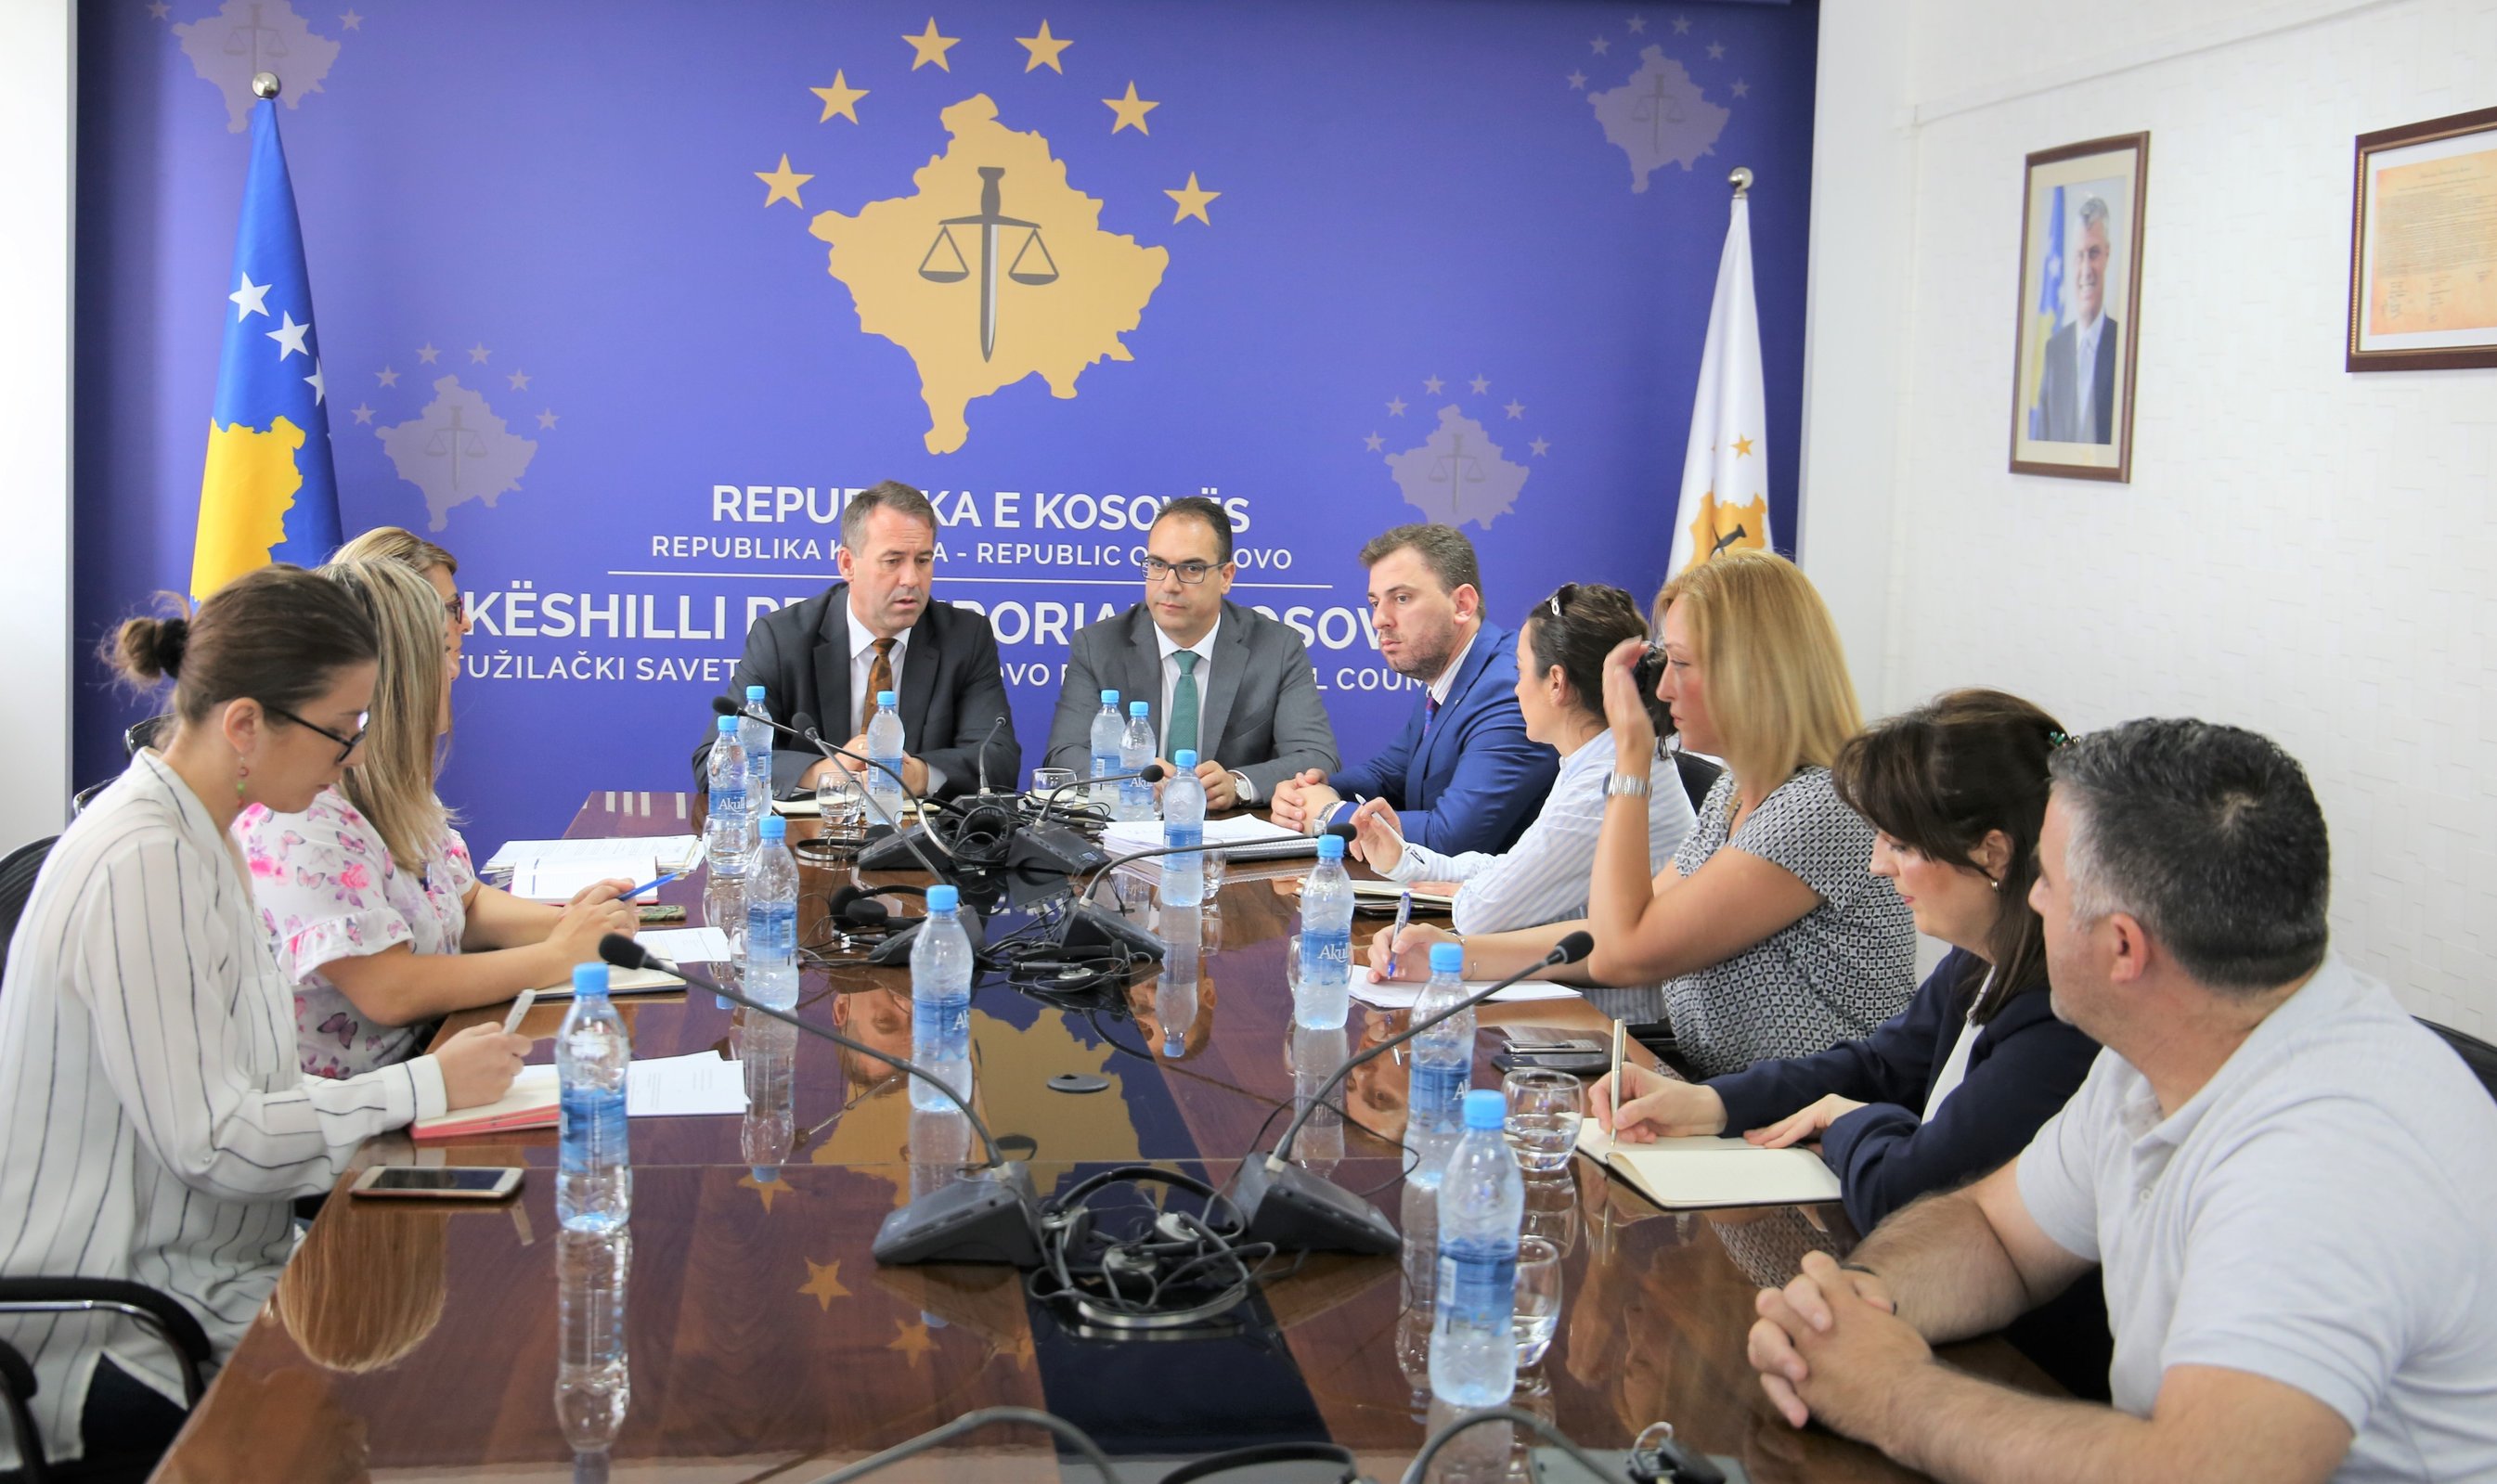 Coordination of the former ODP staff transfer to the Prosecutorial Council administration